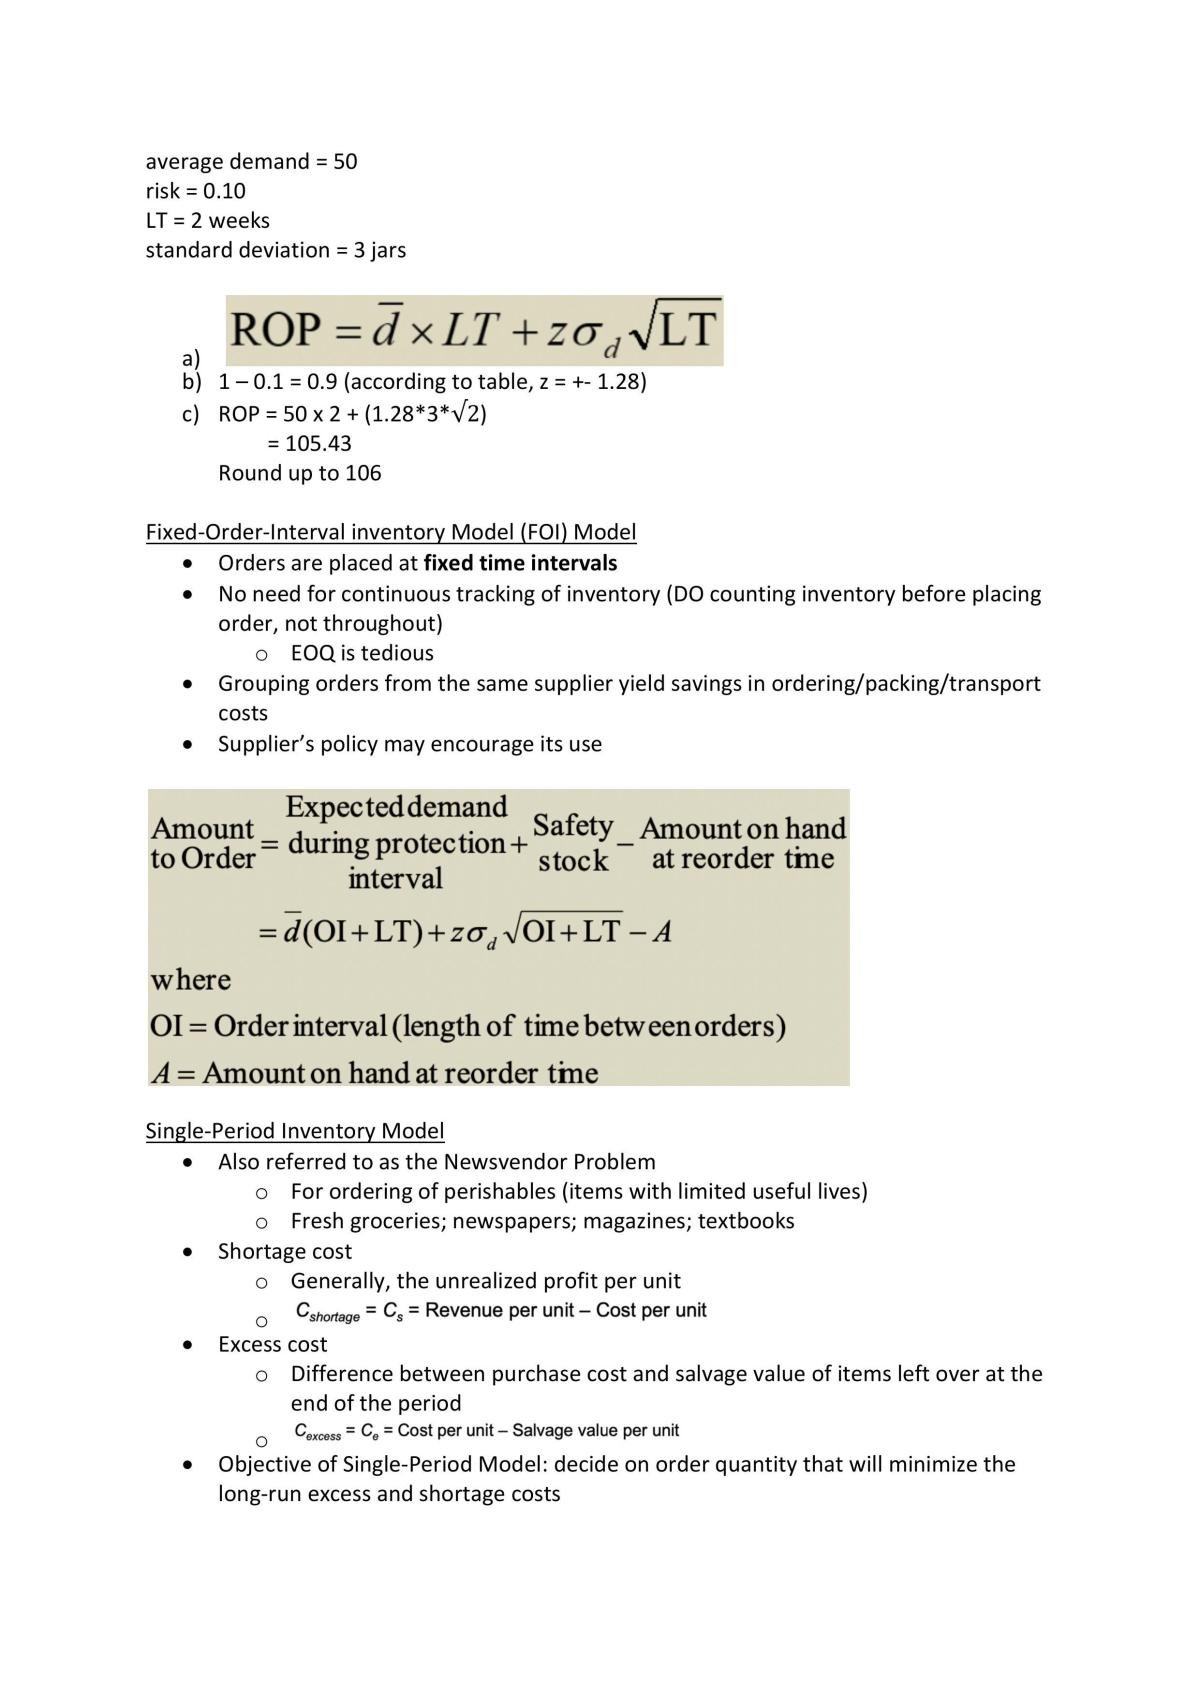 DAO2703 Complete Study Notes - Page 29